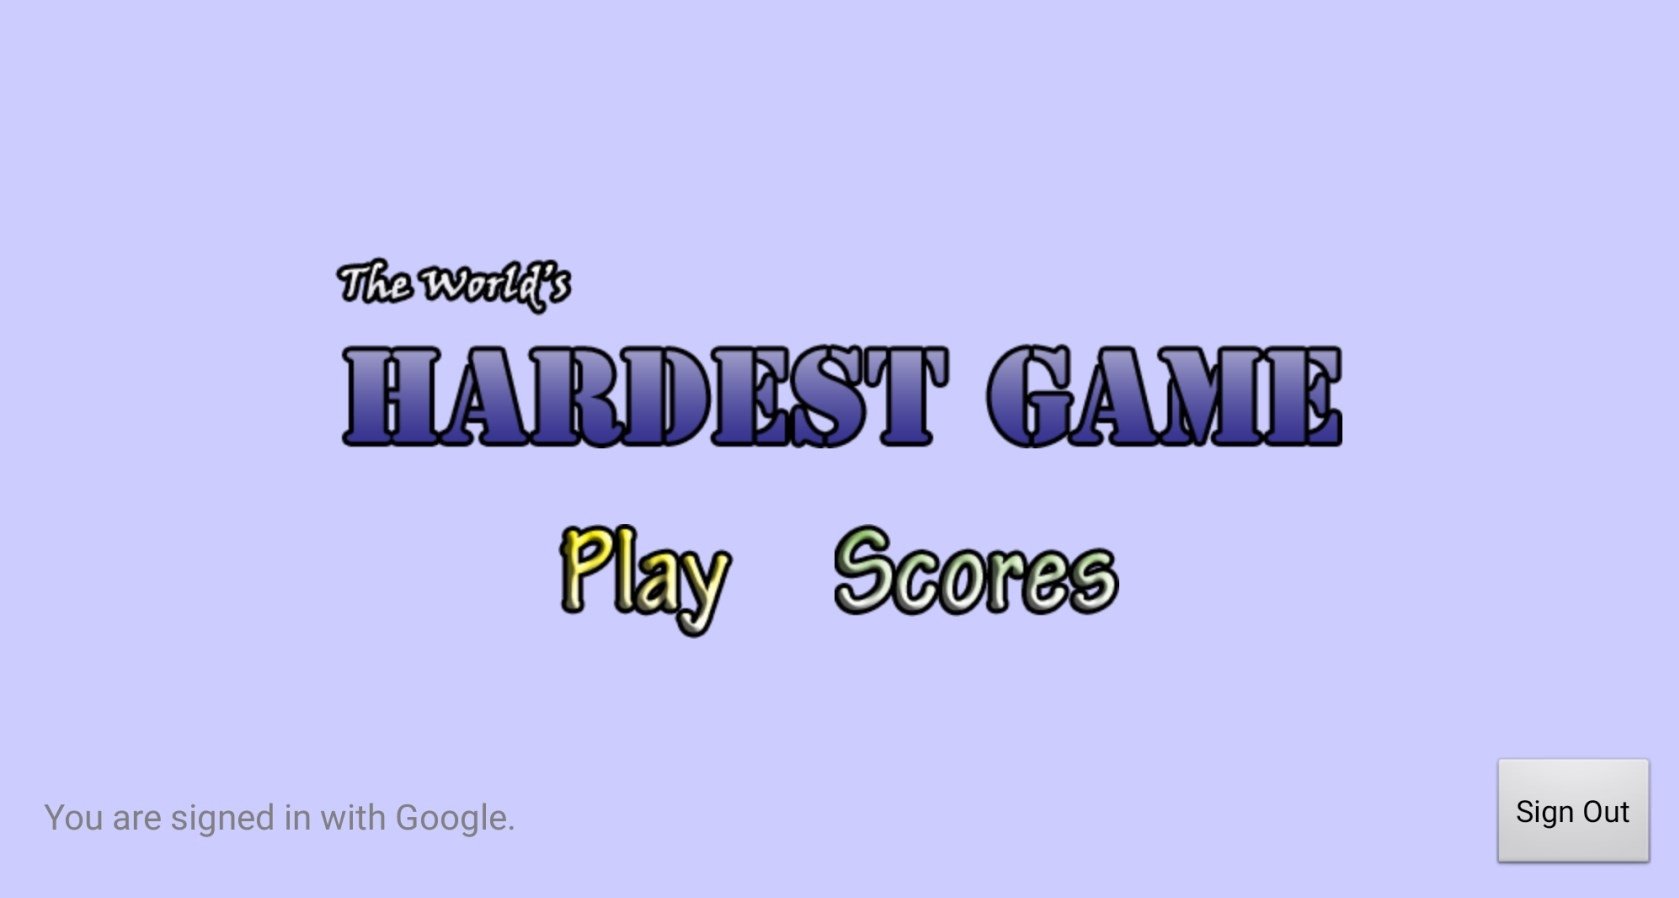 Download The World's Hardest Game 2 android on PC